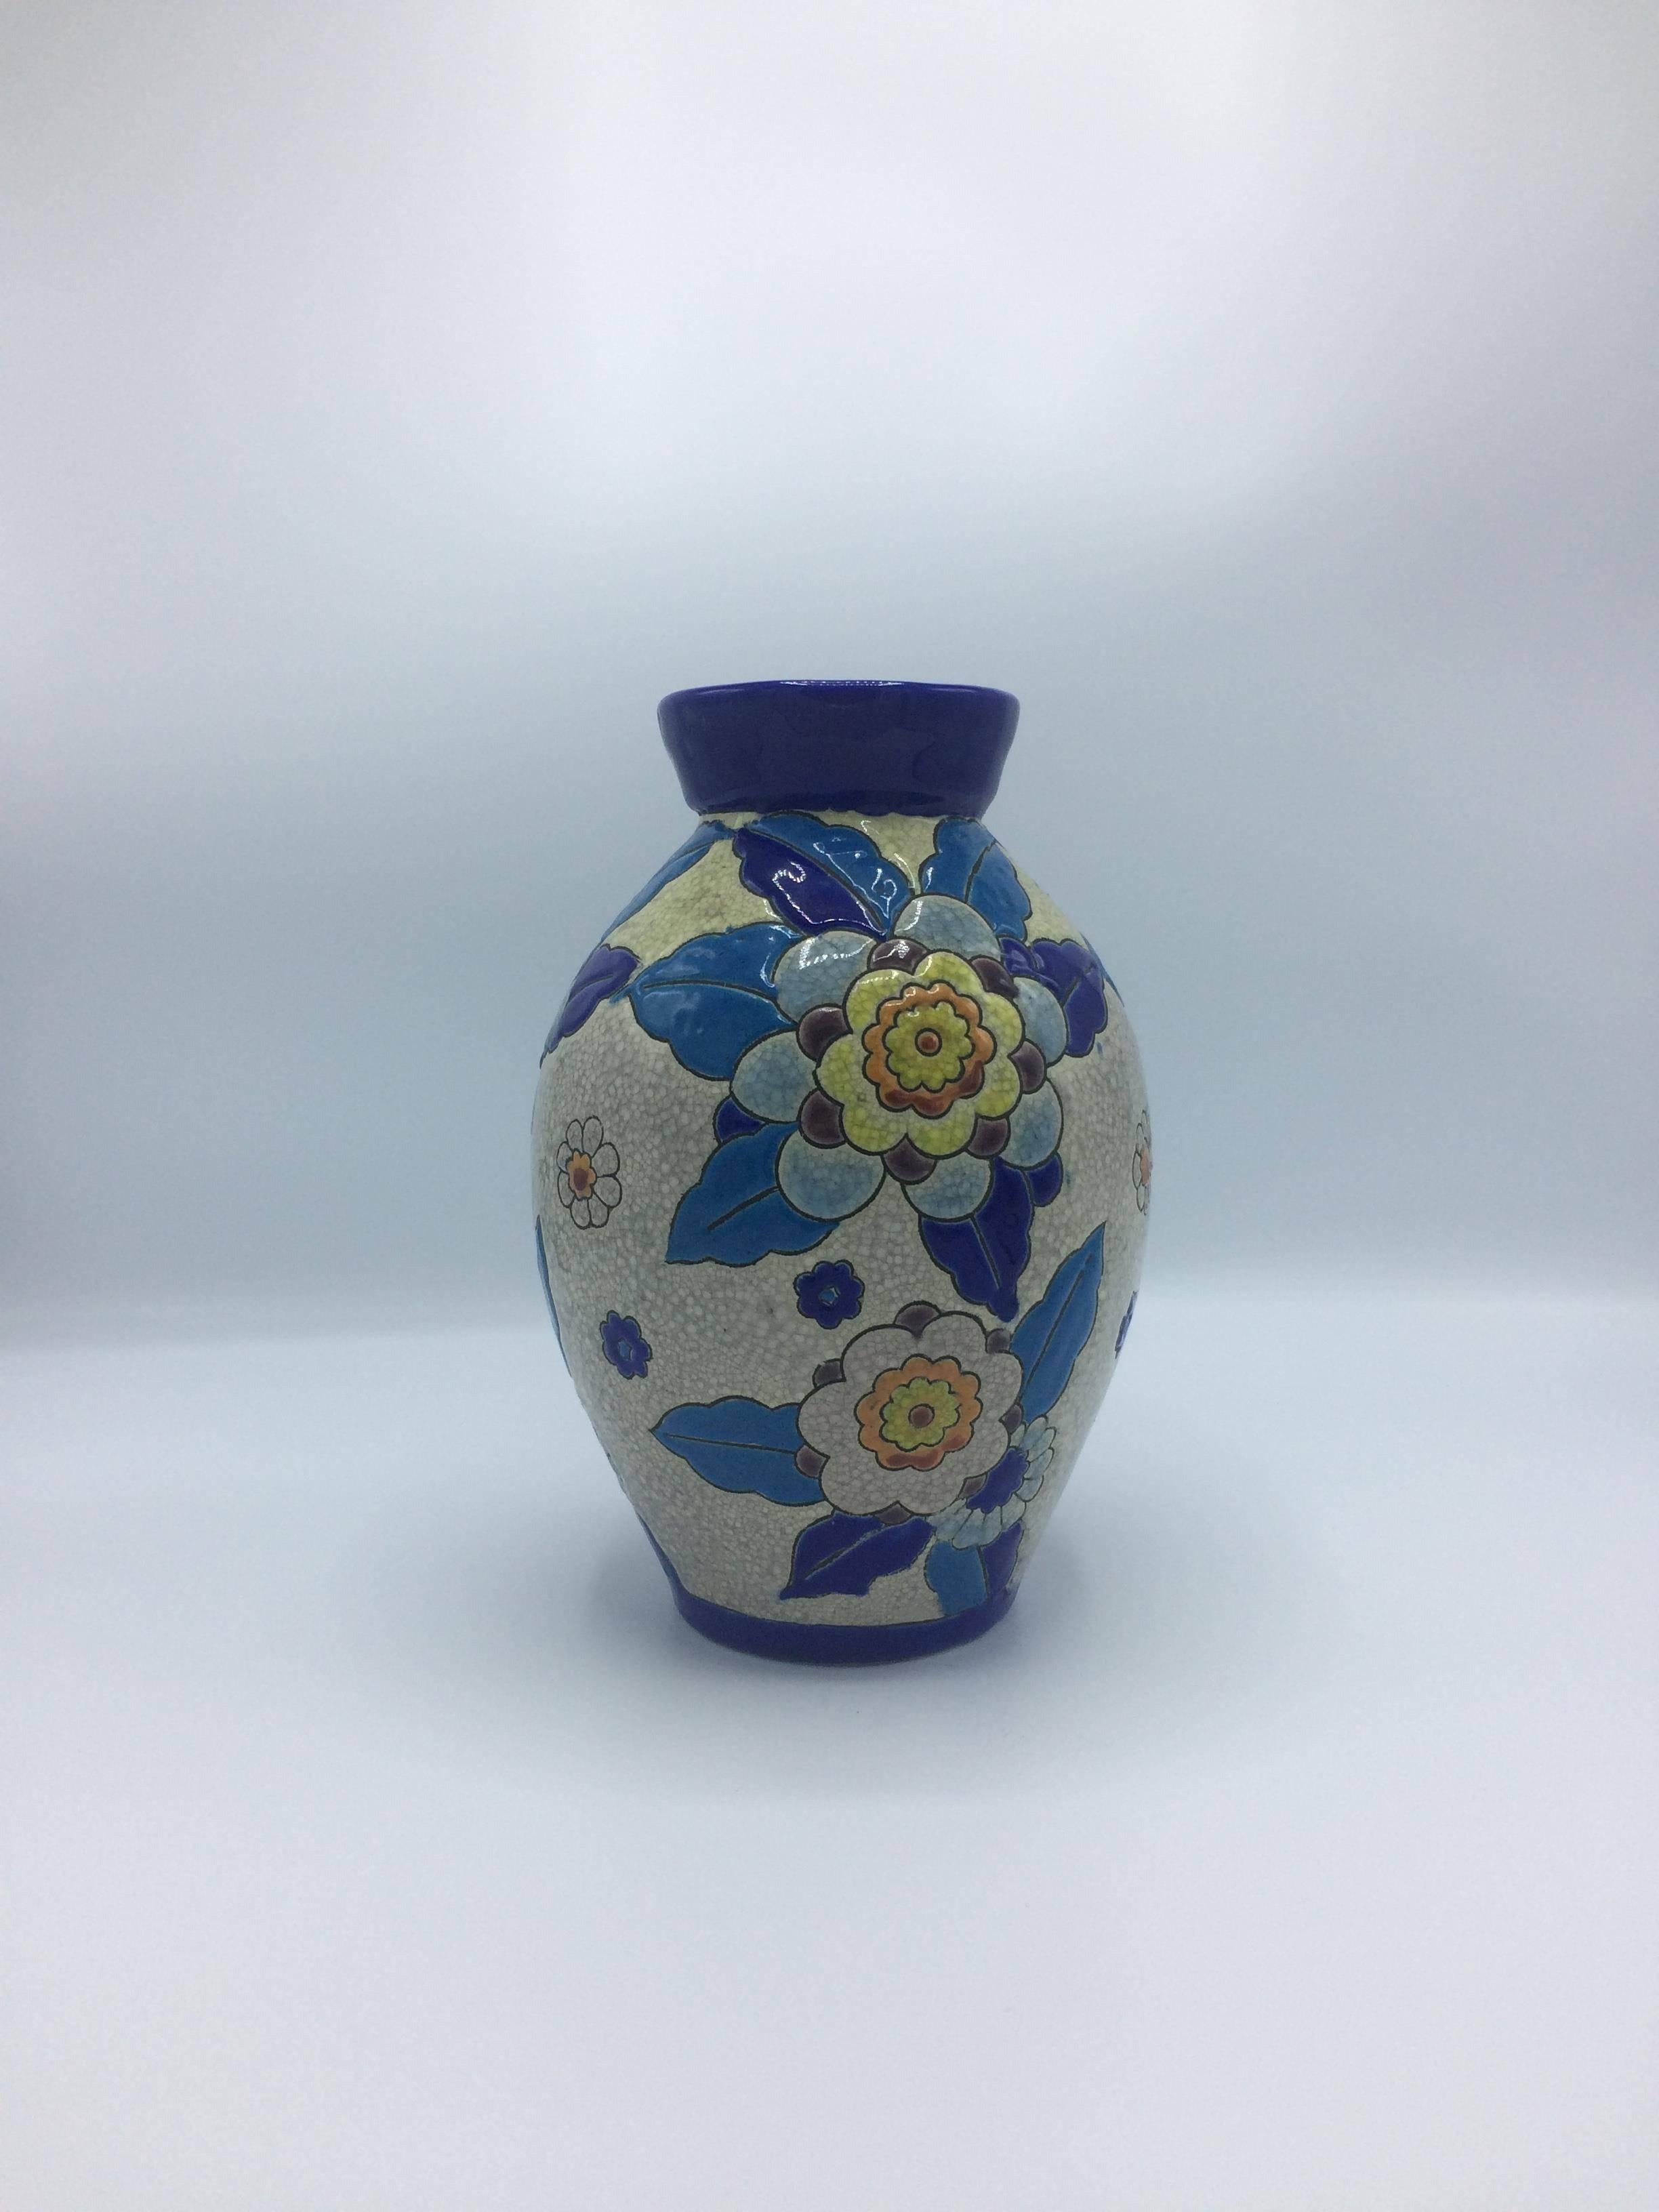 This impressive vase was made in Belgium by Keramis, which later made Boch Freres ceramic. This is an early example of the style often used in Bochs floral decals. This vase is in true excellent condition, colorful craquelé, no chips, no cracks.